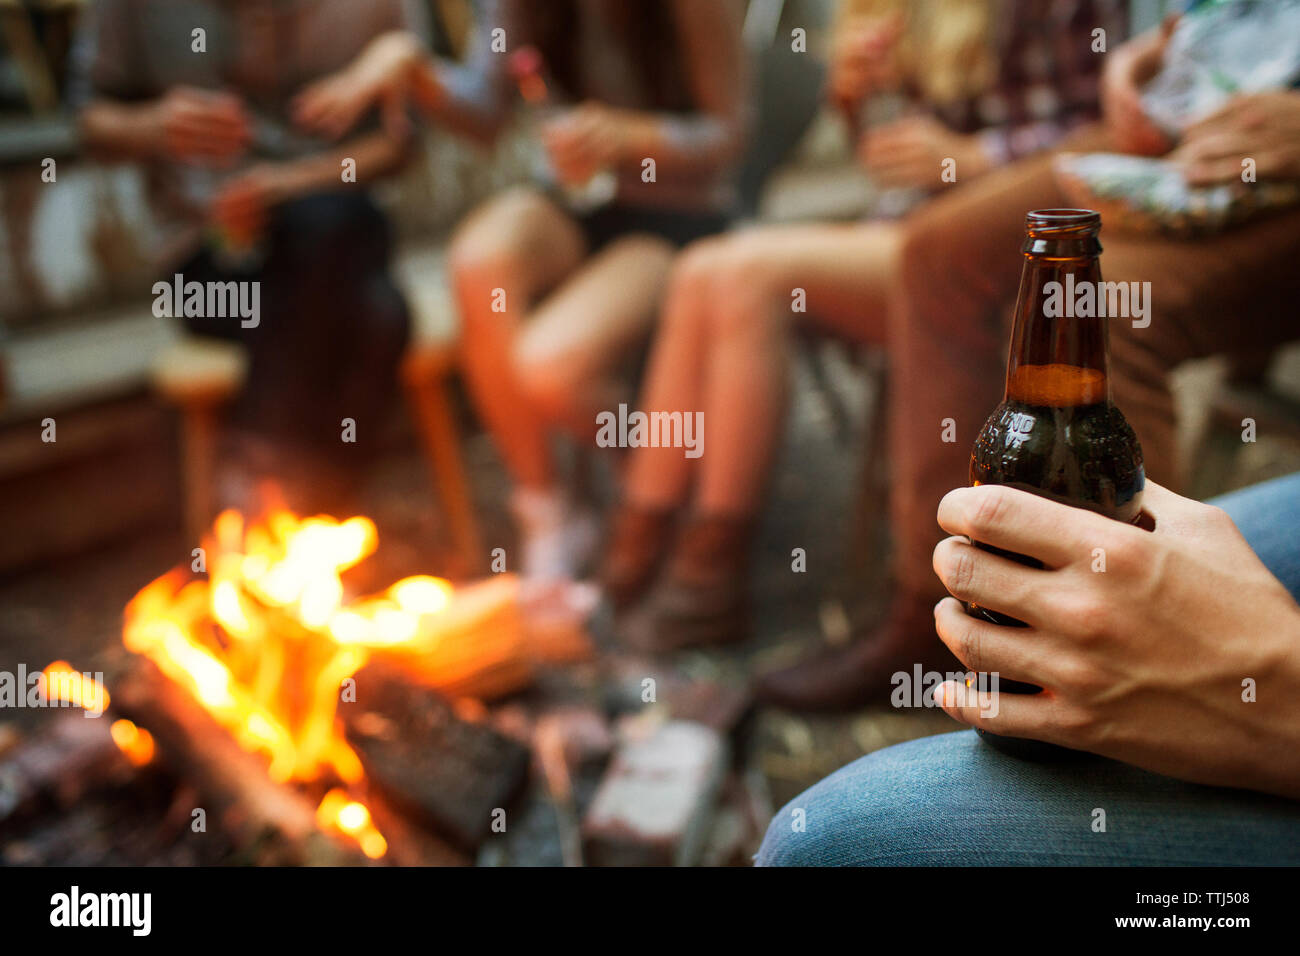 Cropped image of man holding beer bottle while camping with friends Stock Photo